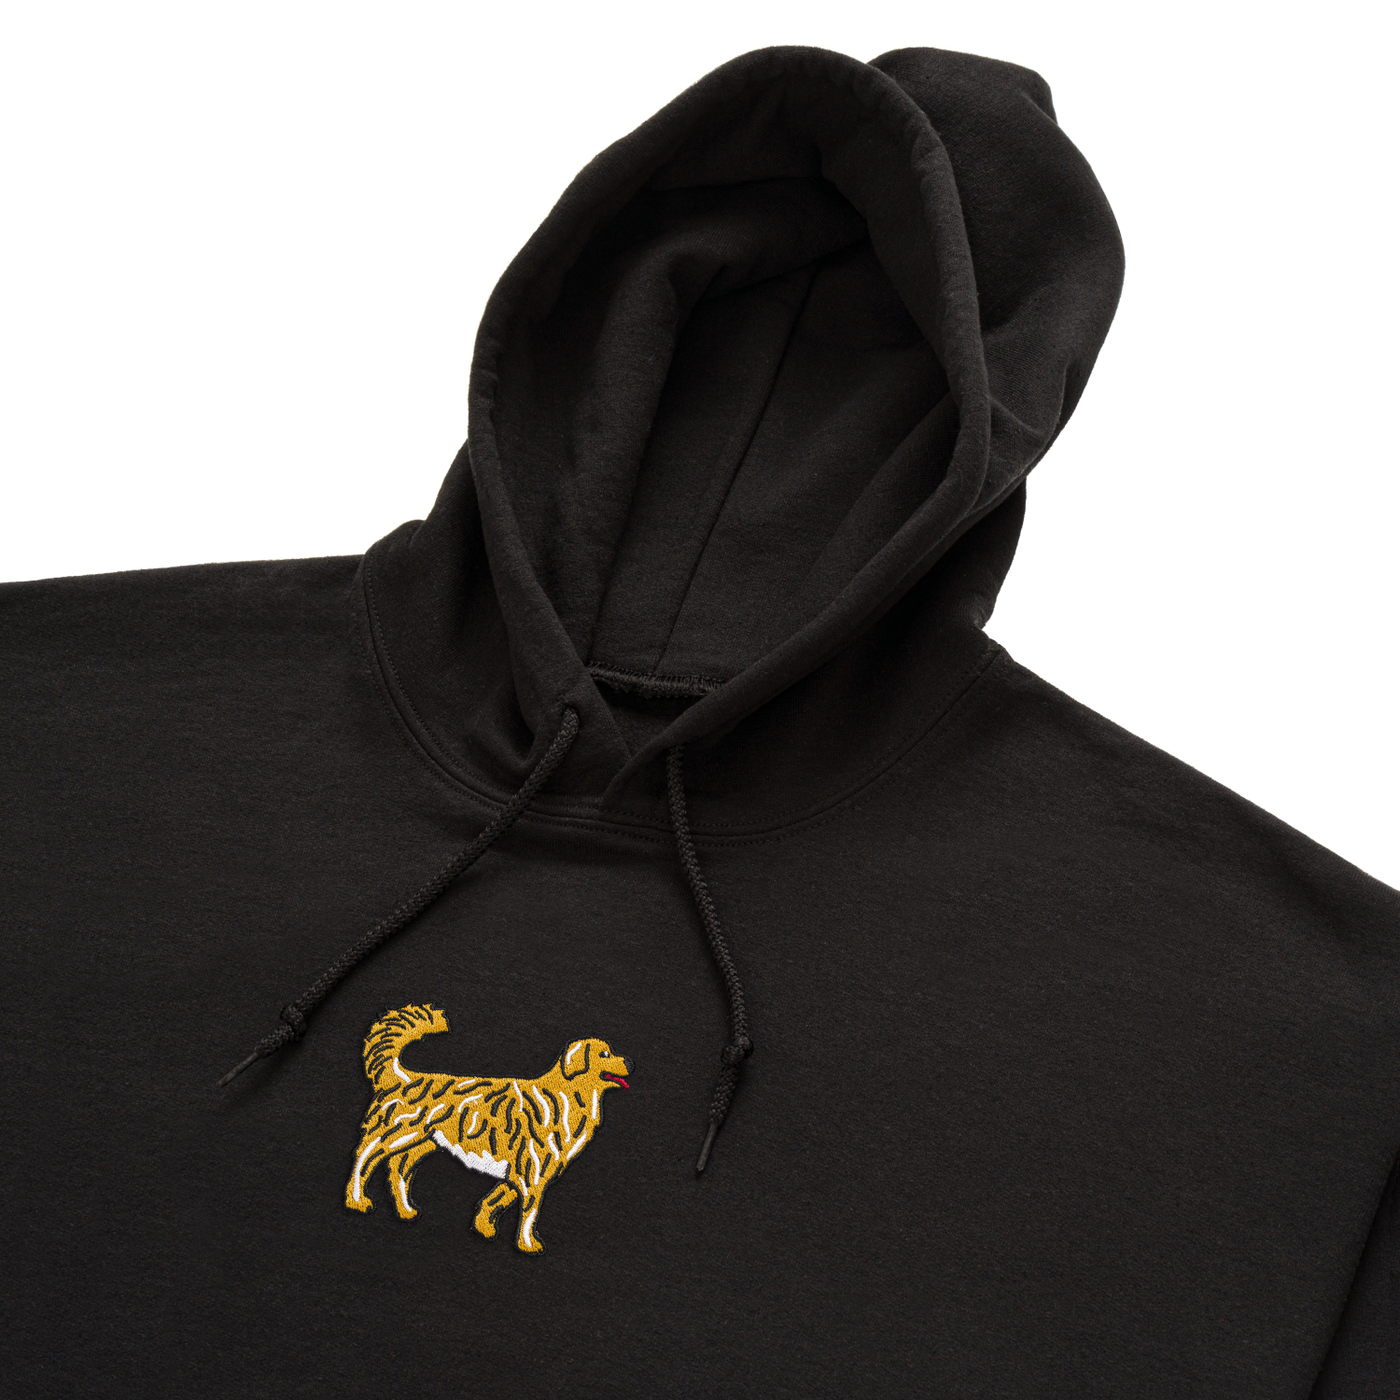 Bobby's Planet Men's Embroidered Golden Retriever Hoodie from Paws Dog Cat Animals Collection in Black Color#color_black